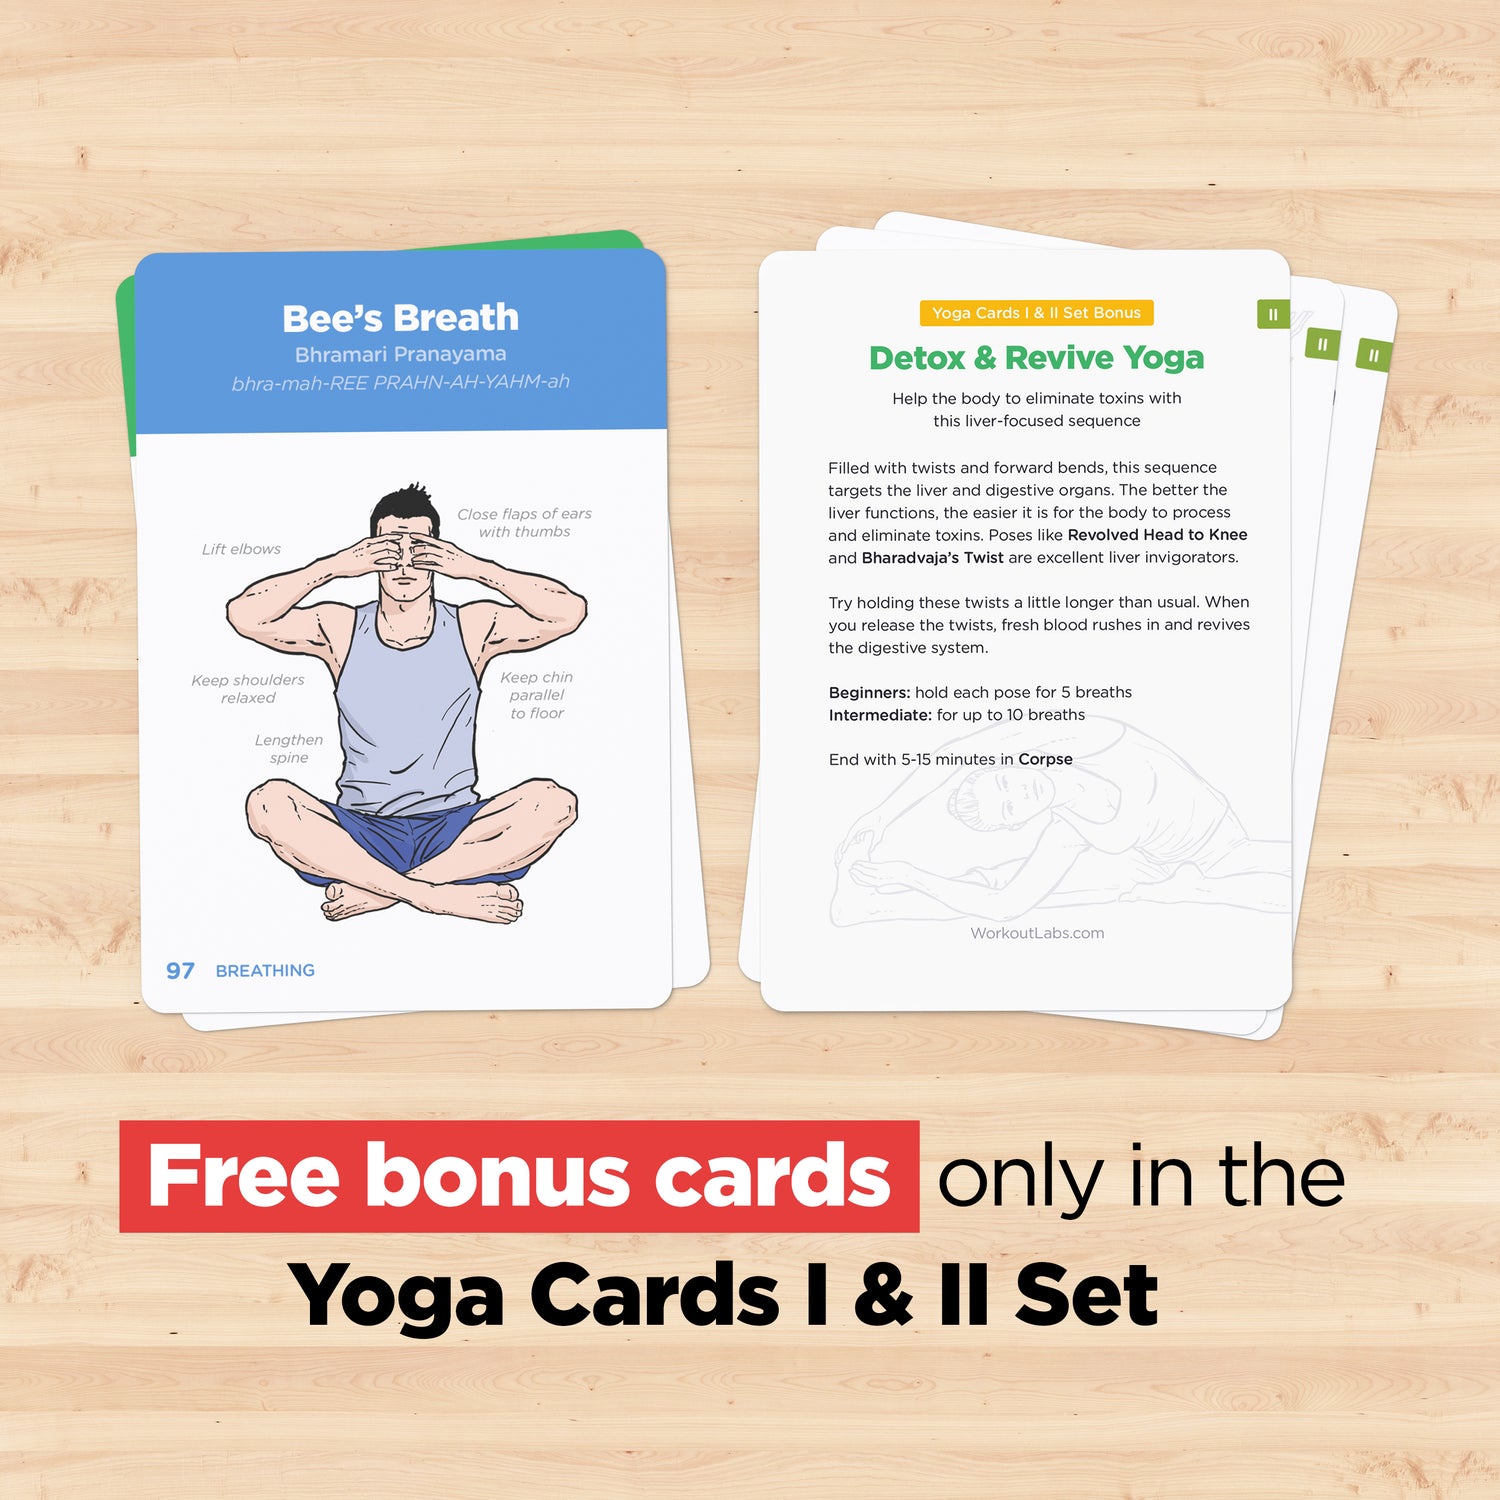 Yoga Cards I & II Set – Study, Sequencing & Practice